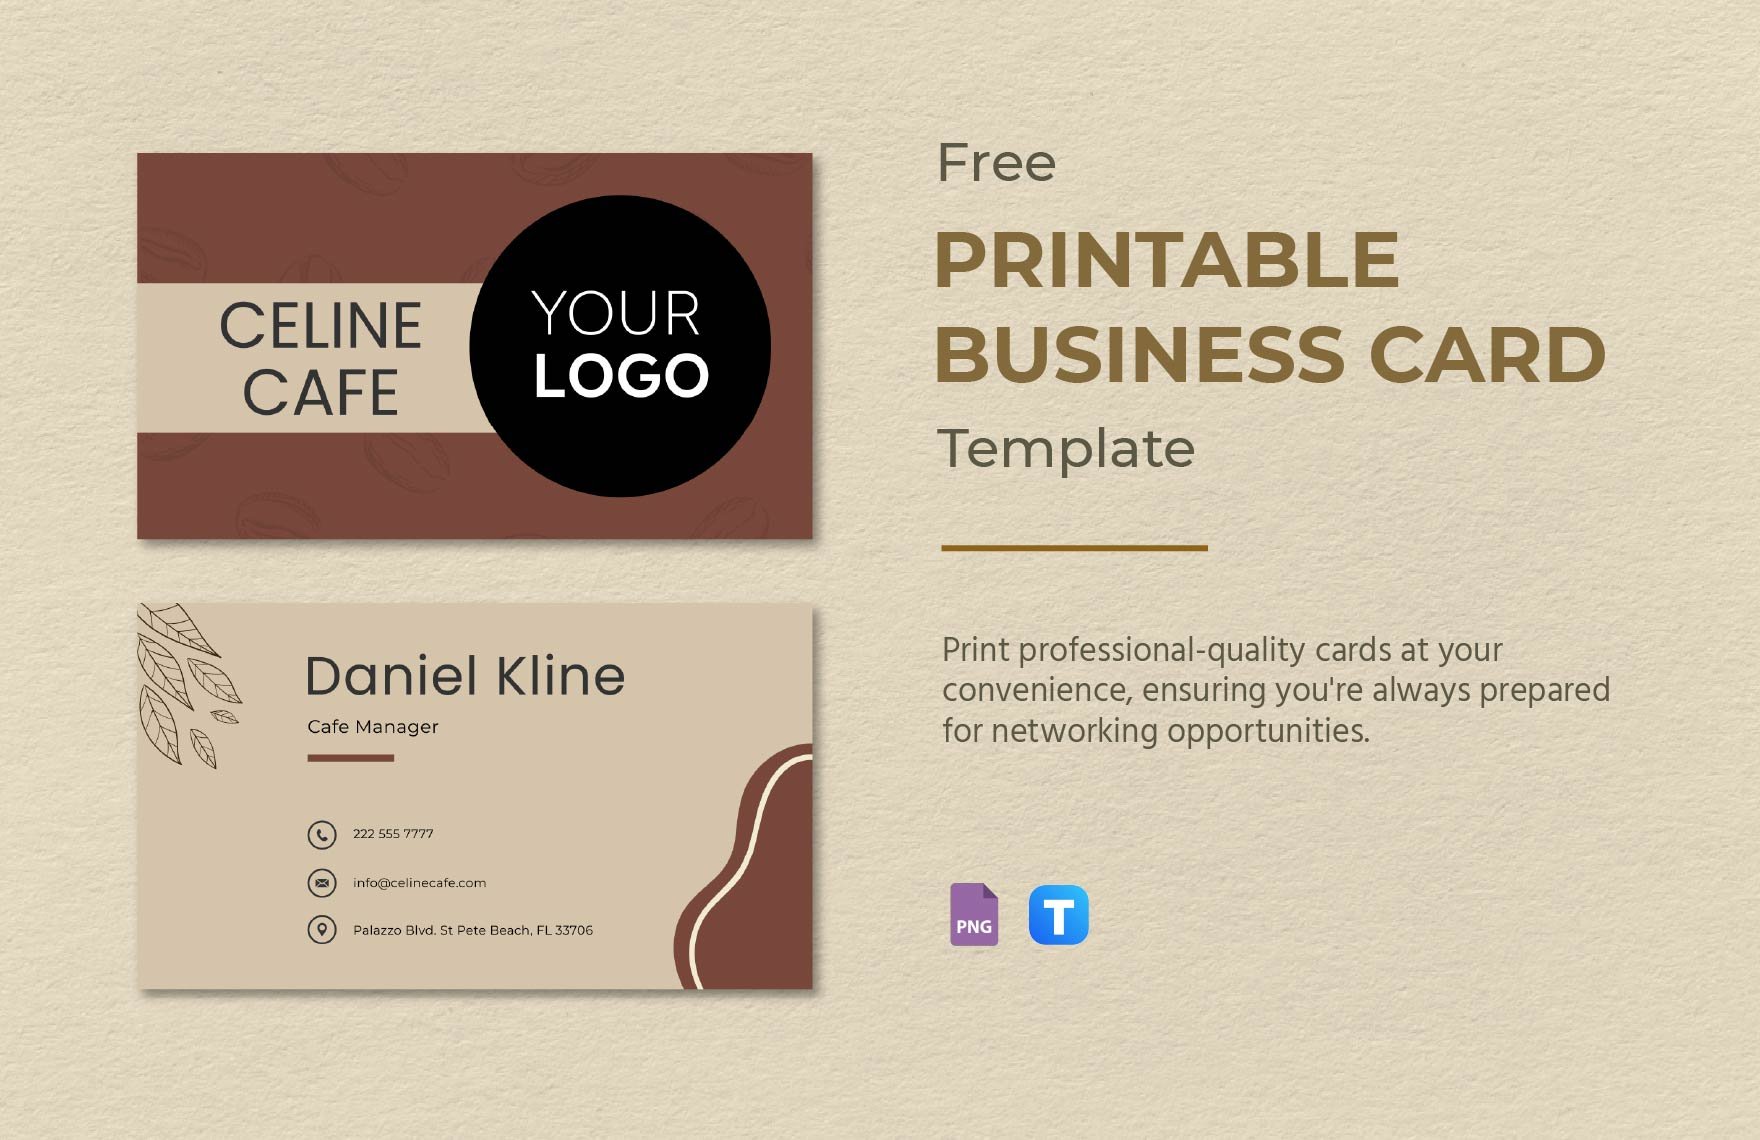 Free Printable Business Card Template